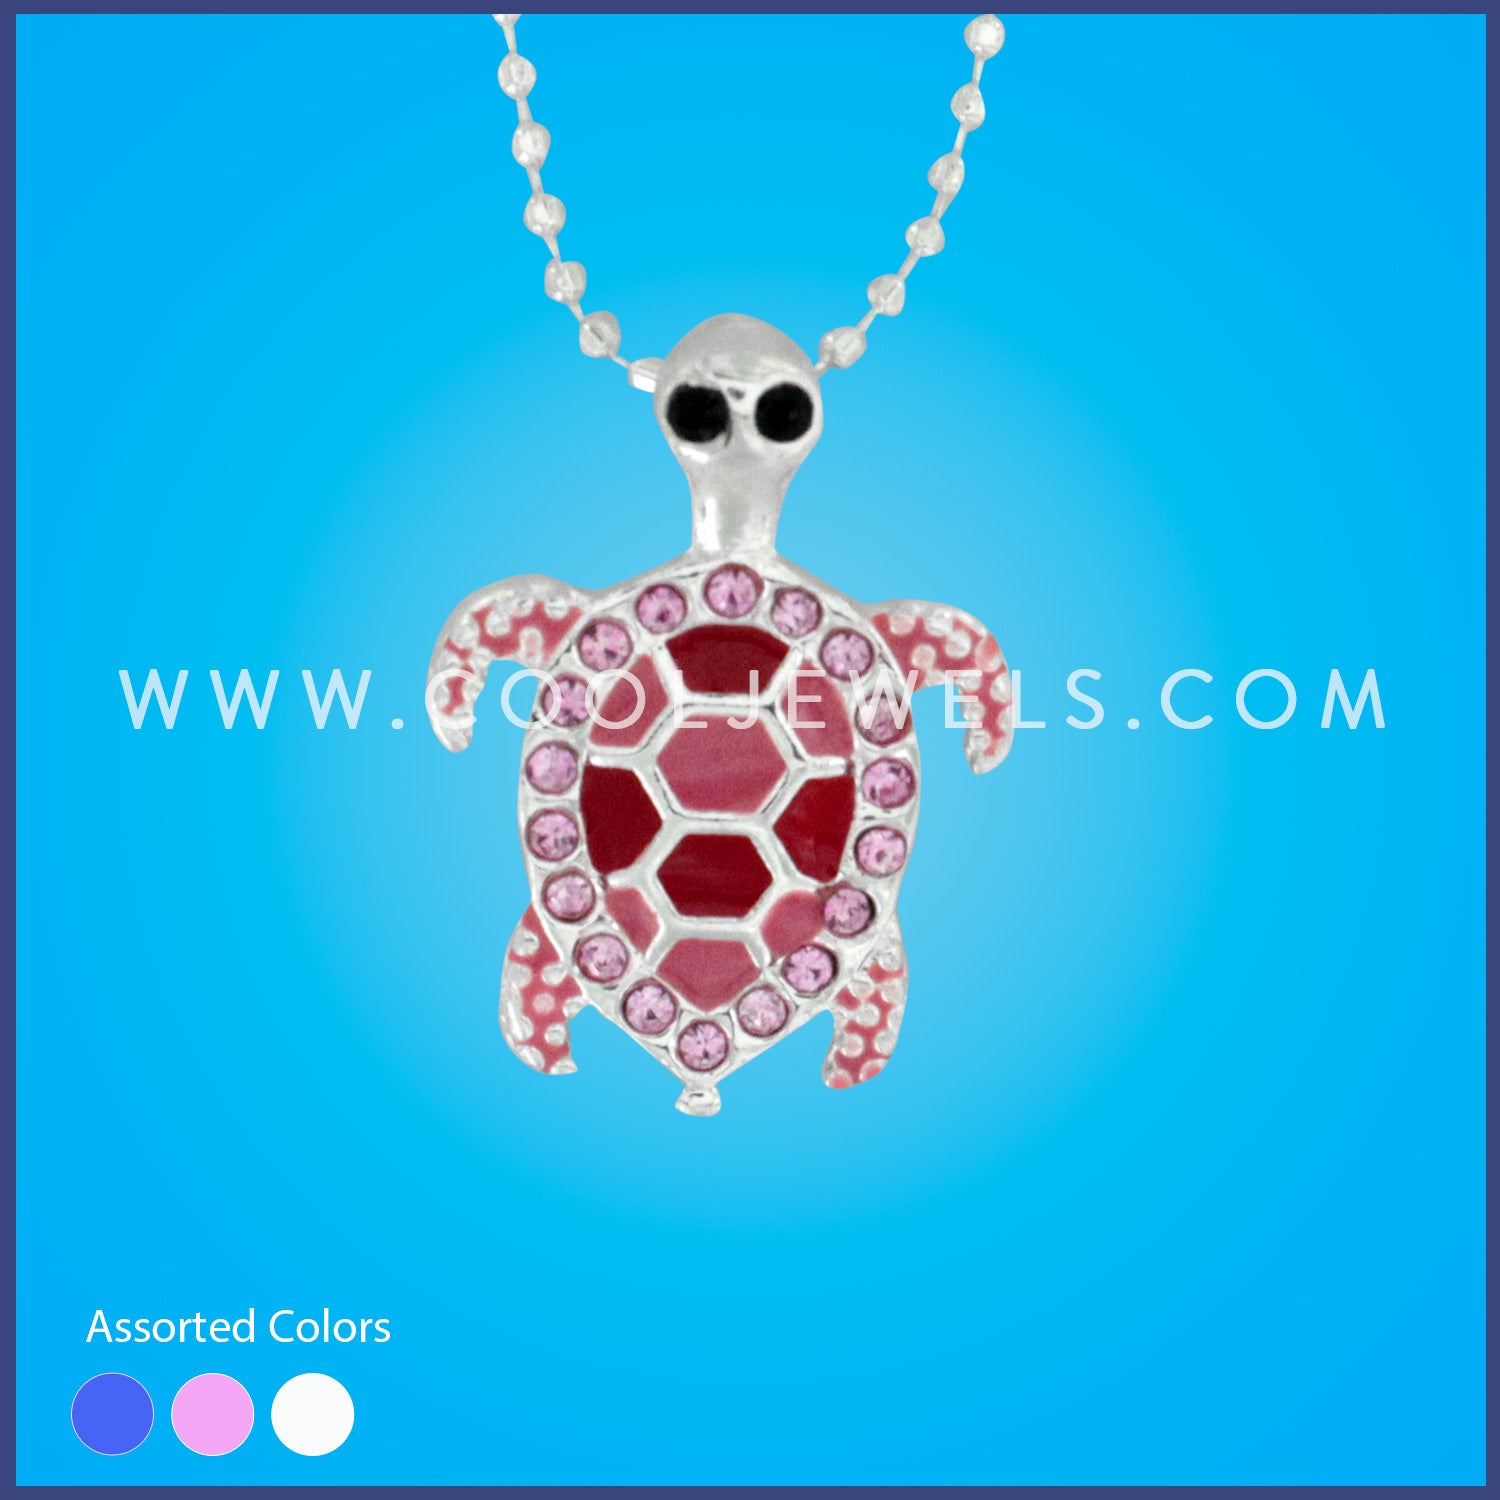 SILVER BALL CHAIN NECKLACE WITH RHINESTONE TURTLE - ASSORTED